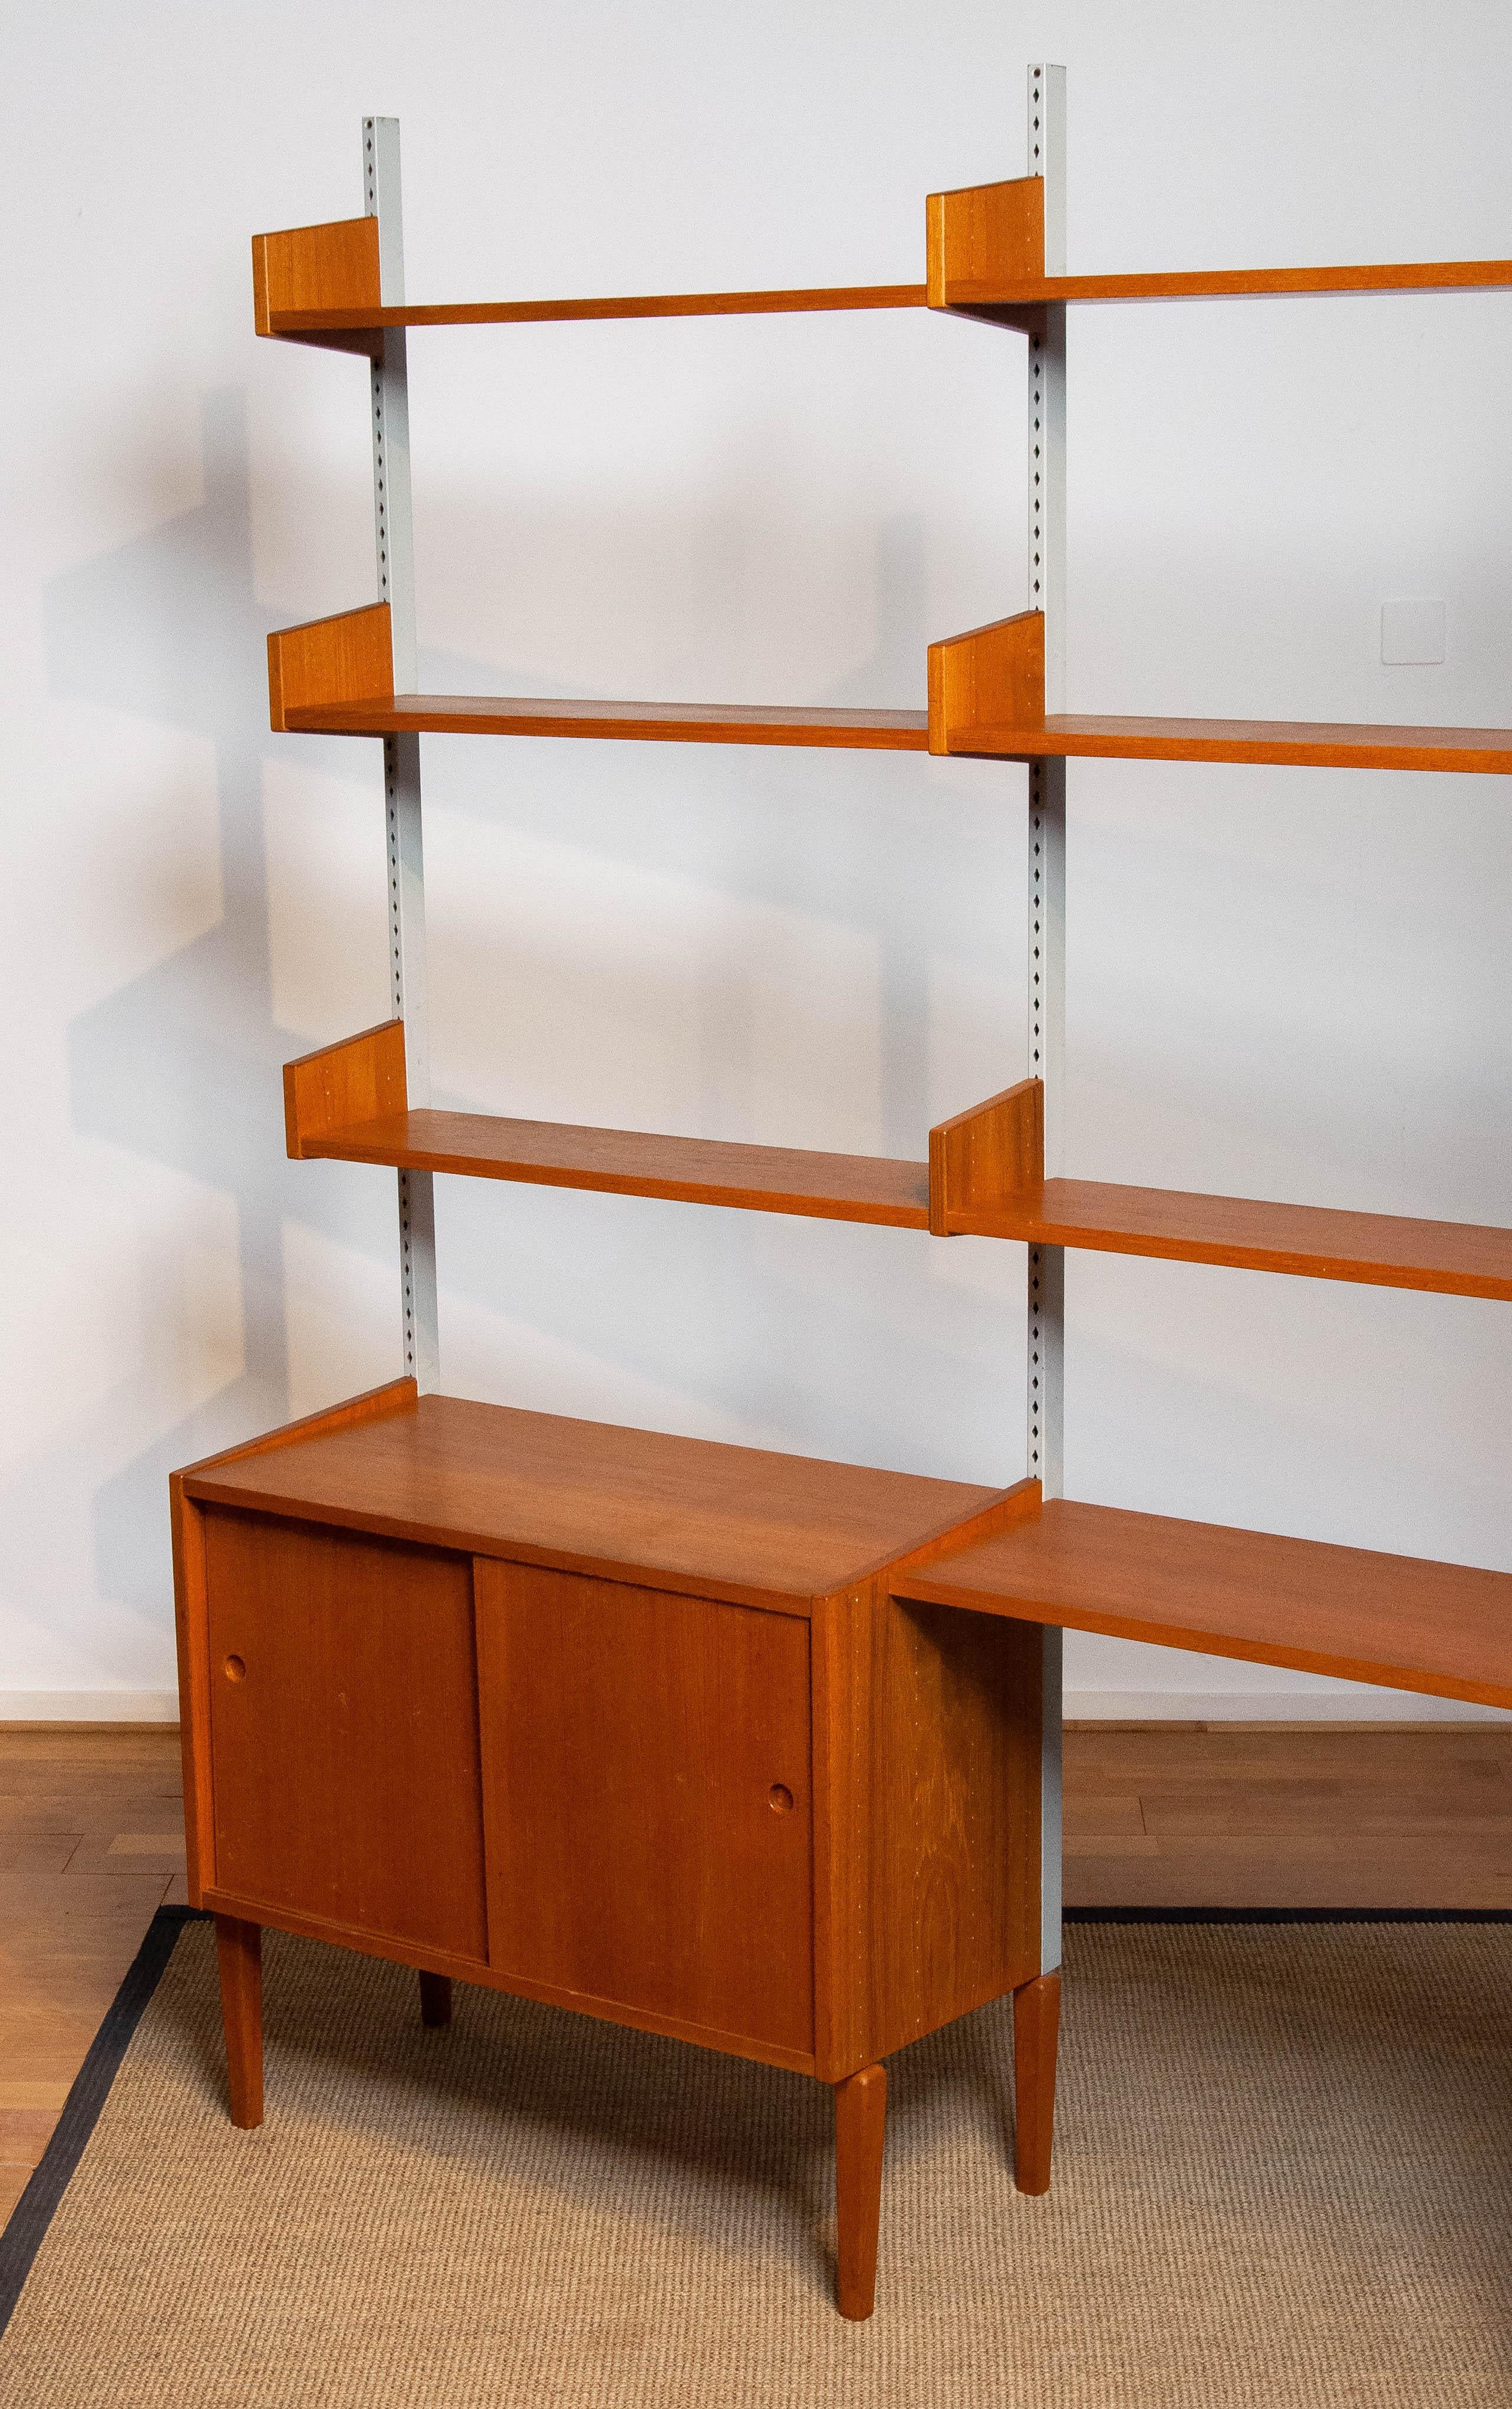 Swedish Teak Modulair Shelf System / Bookcase with Steel Bars by Harald Lundqvist 1950